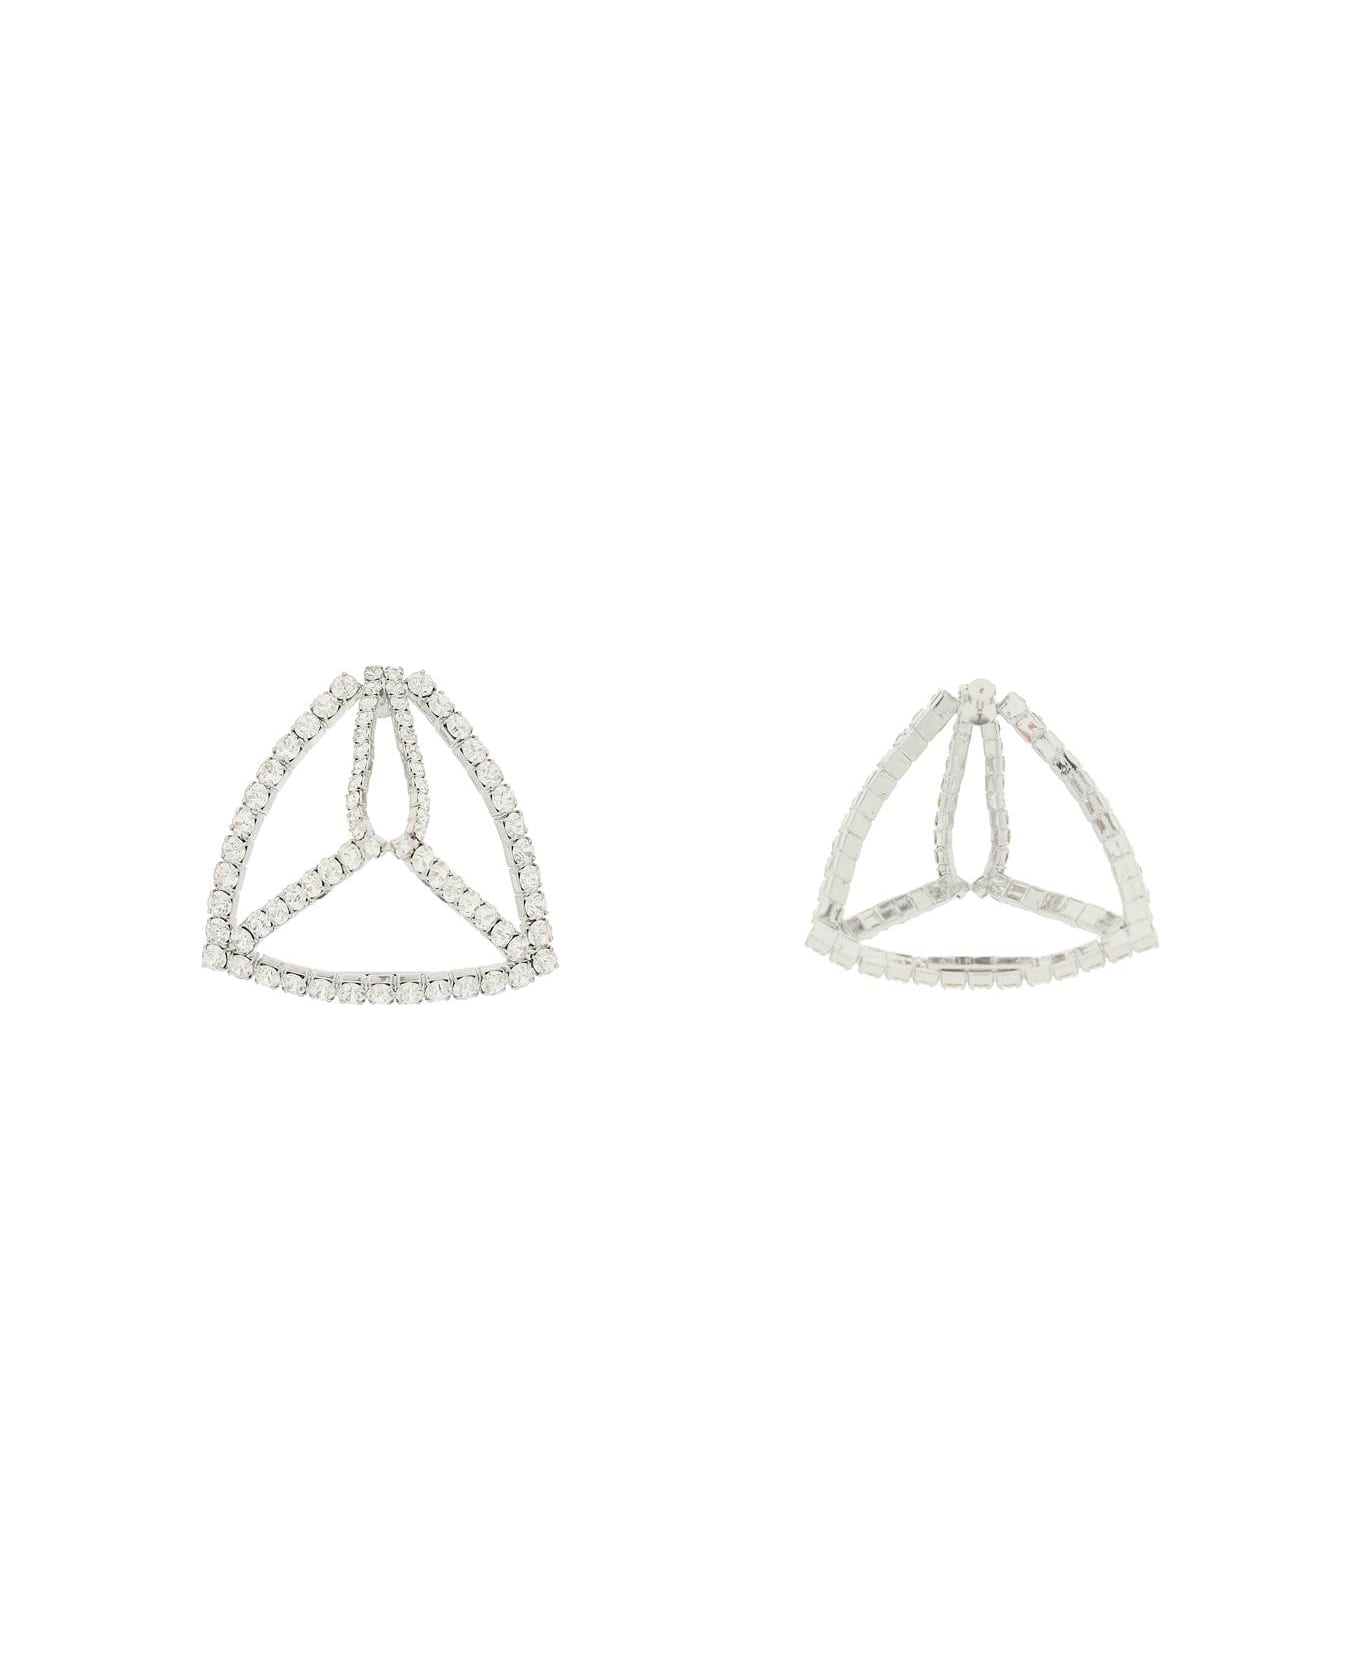 AREA 'crystal Pyramid' Earrings - CLEAR SILVER (Silver) イヤリング